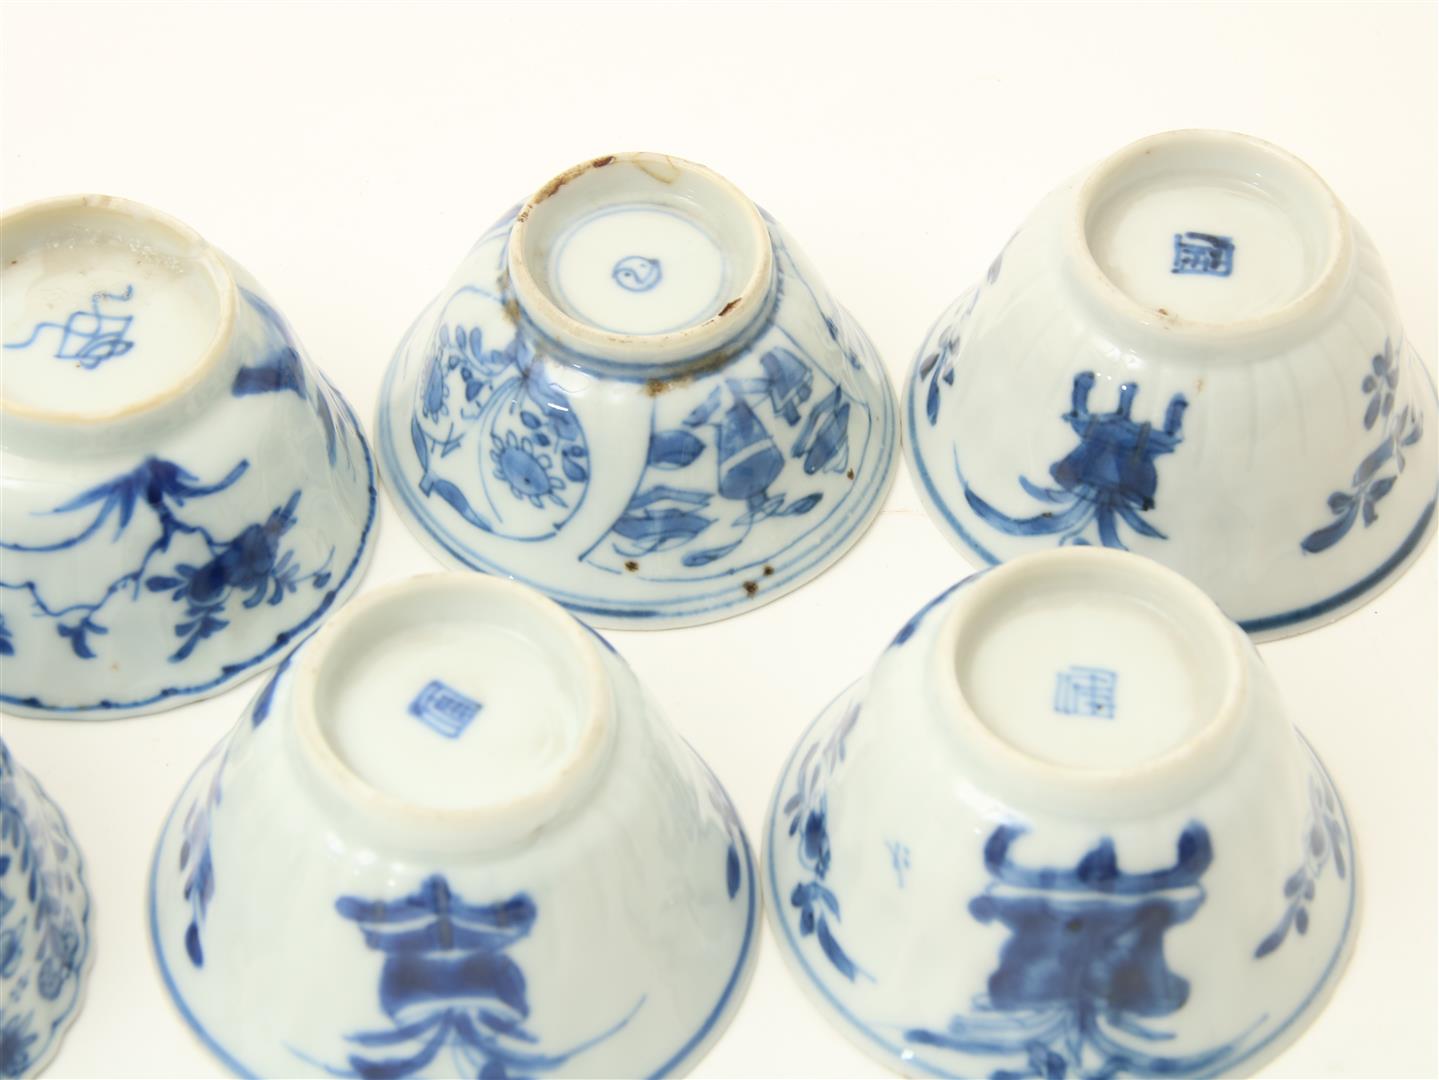 Series of 3 porcelain Kangxi cups with flower decoration and marked with Lozenge mark, including 5 - Image 6 of 6